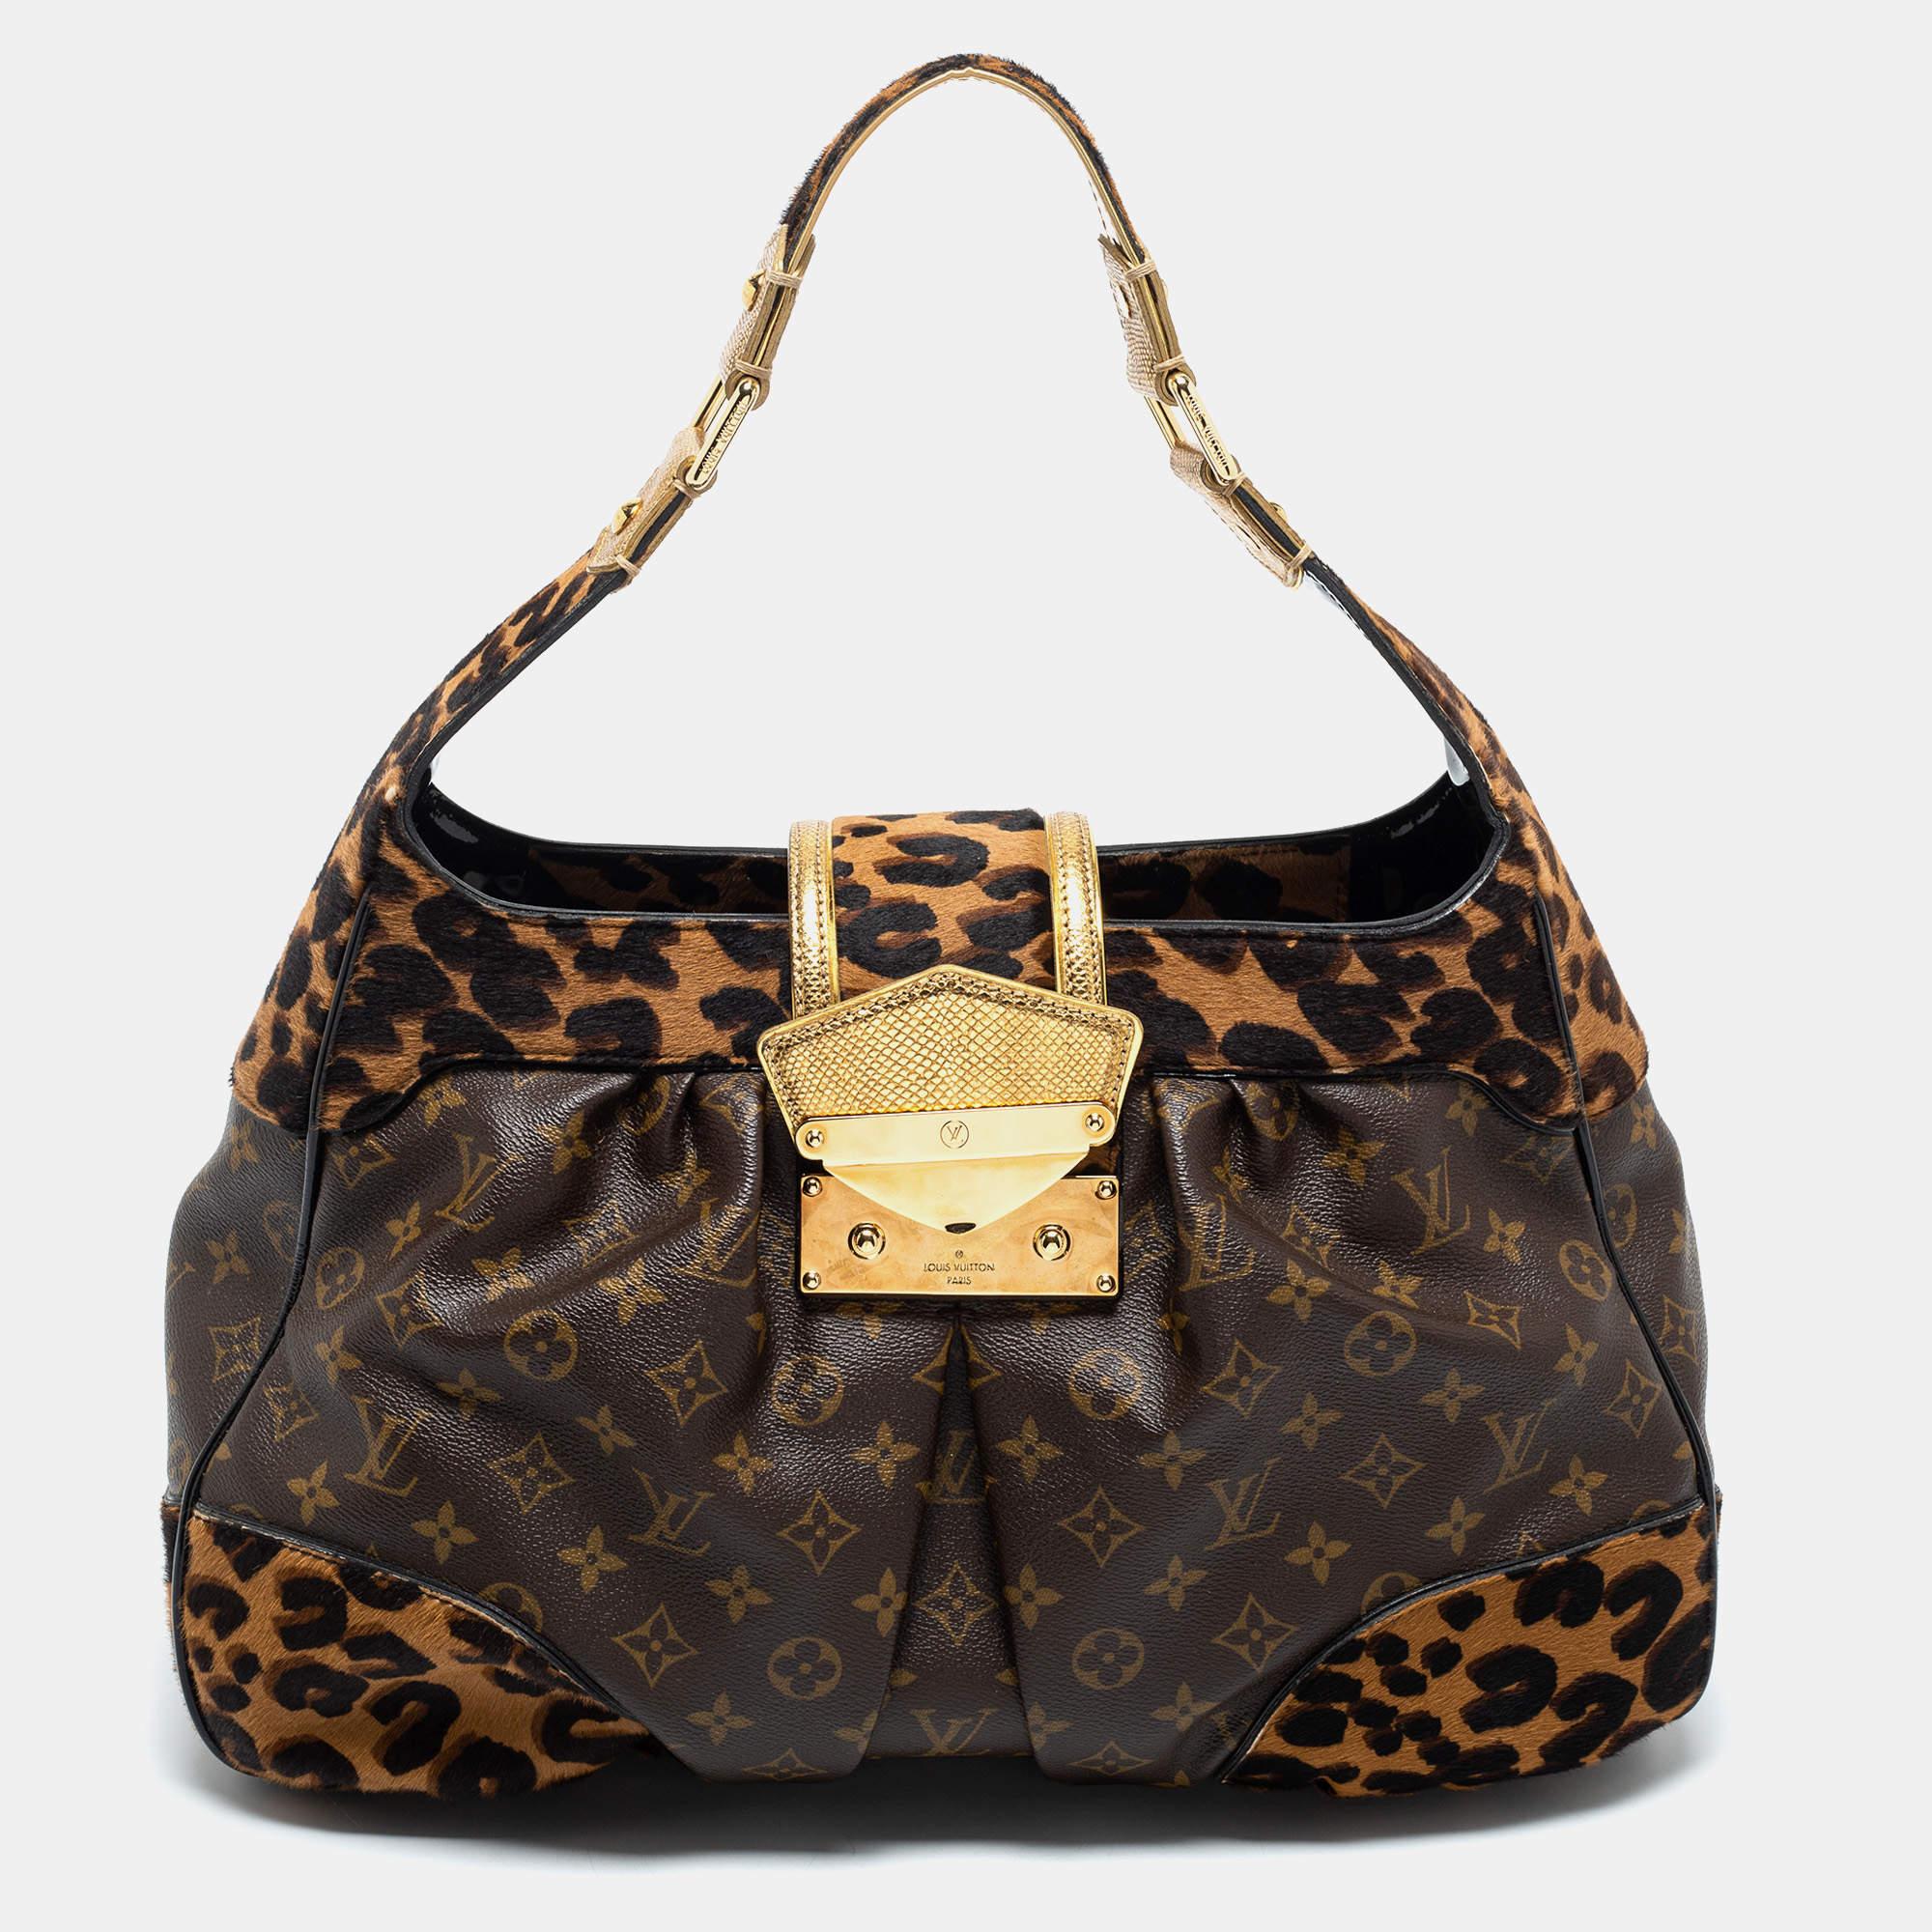 Louis Vuitton's Limited Edition Polly is made from leopard-print calf hair, karung leather, and with the charm of LV's Monogram canvas. The interior is lined with Alcantara. Invest in this appealing LV bag today.

Includes: Original Dustbag

